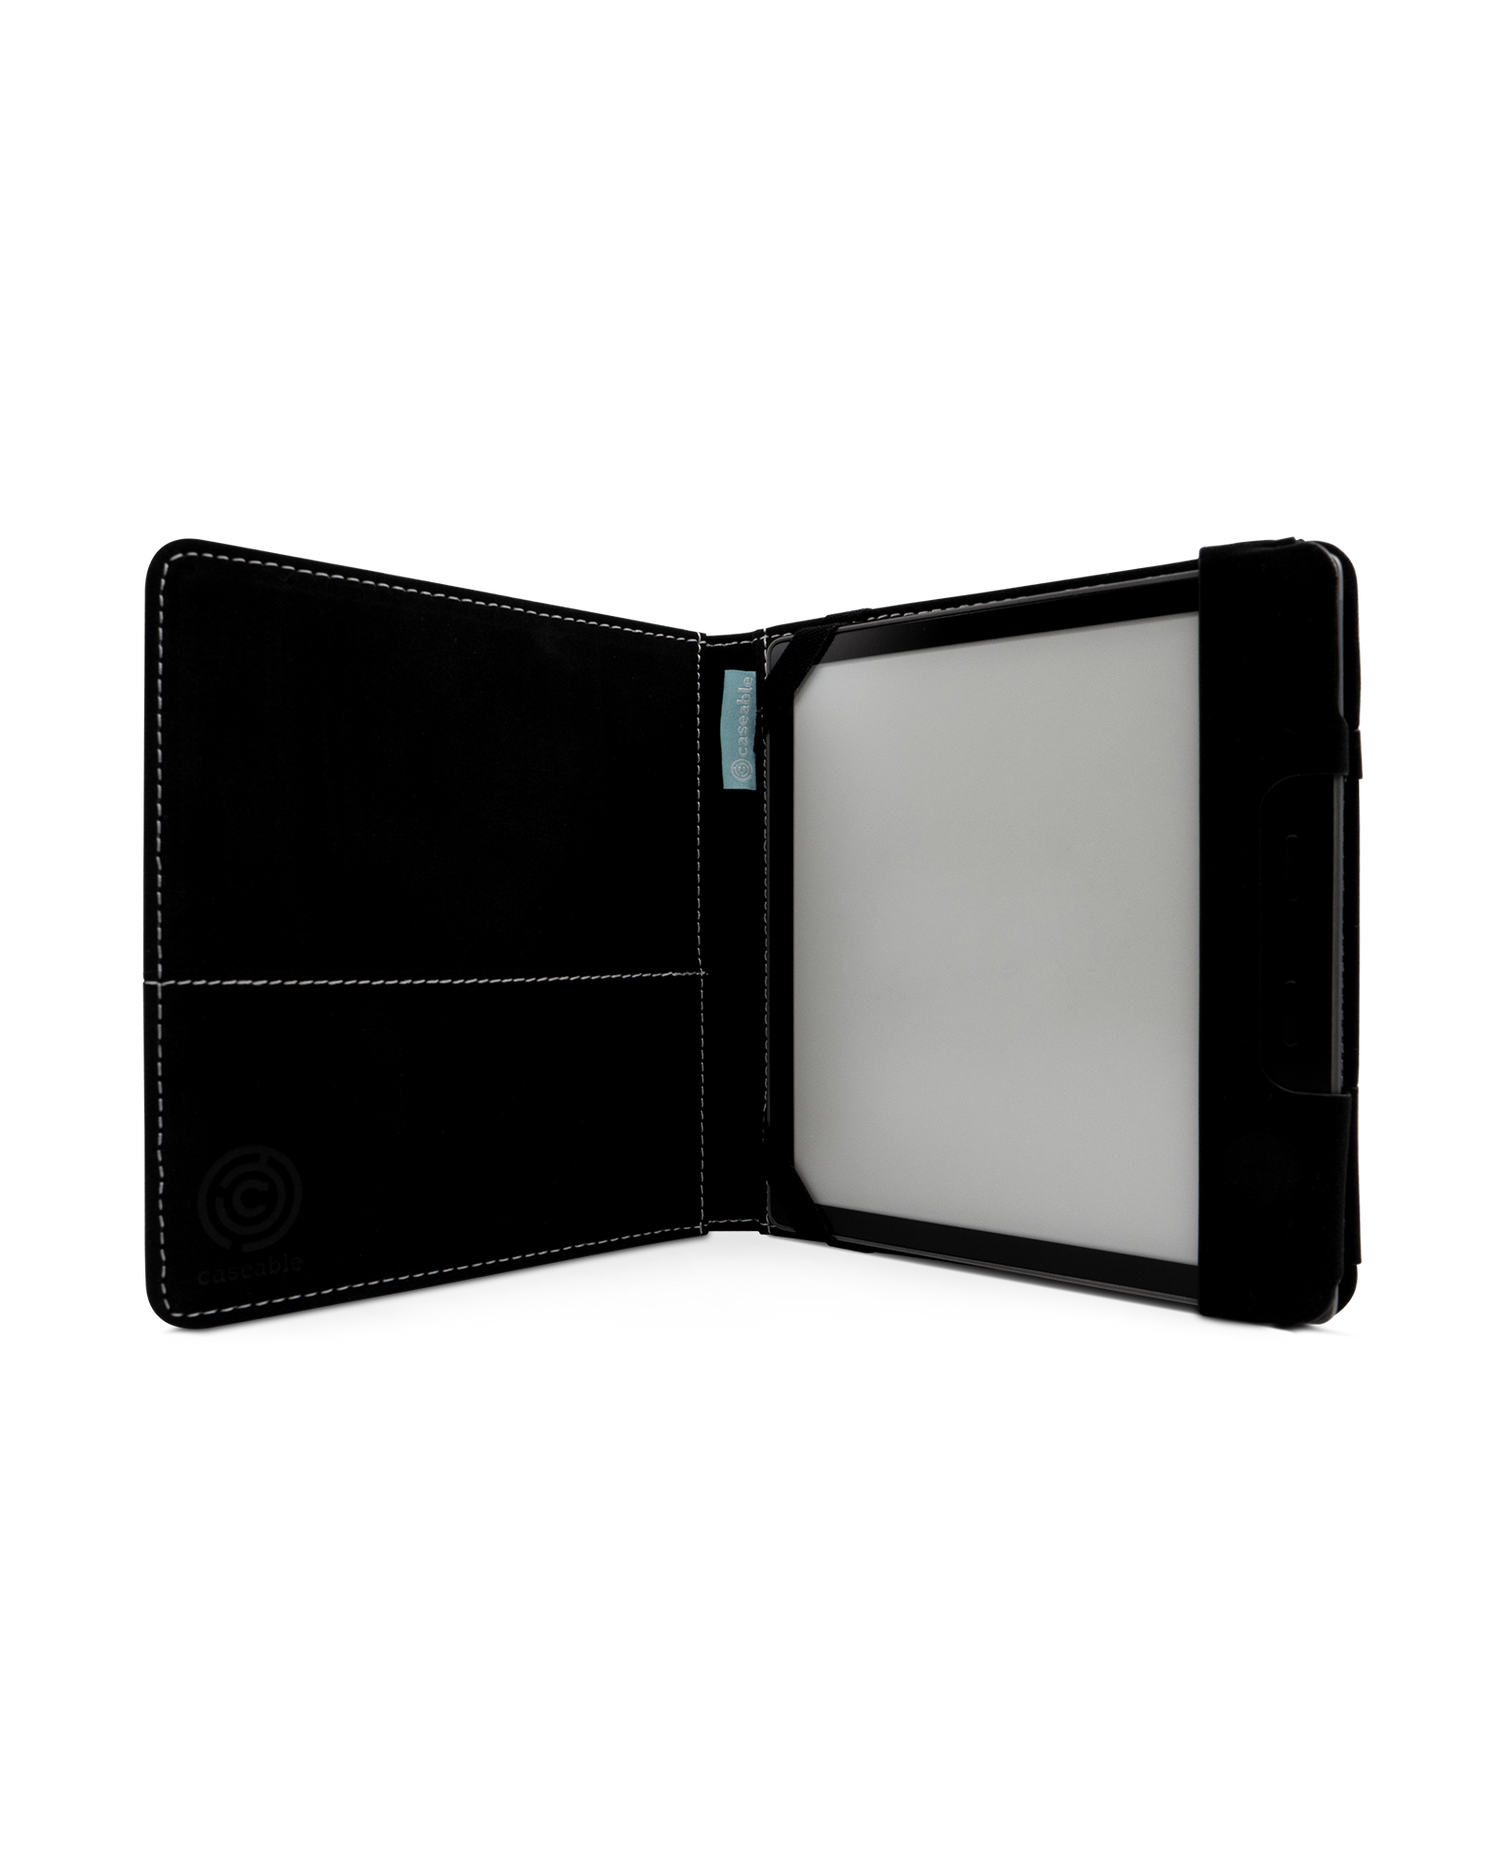 Mother of Pearl Marble eReader Case for tolino vision 6: Opened interior view